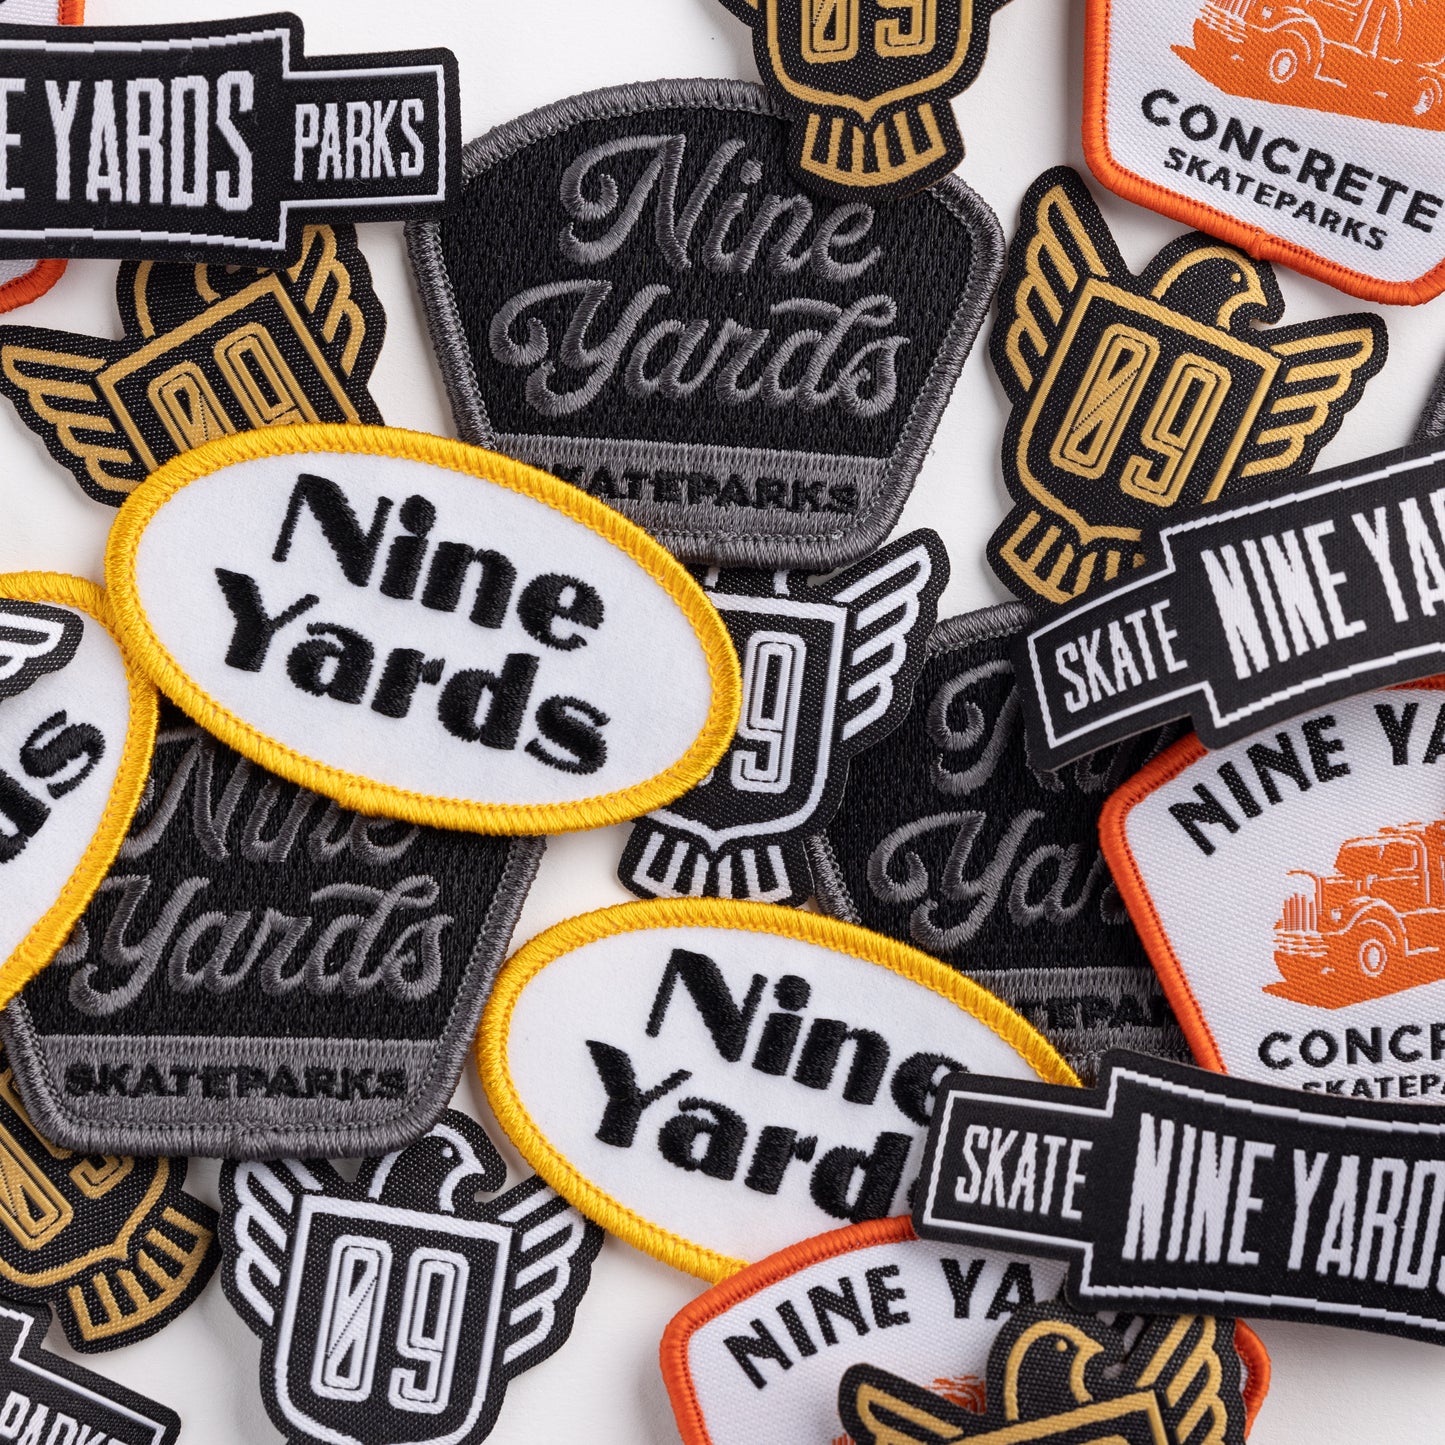 Nine Yards Patch Package